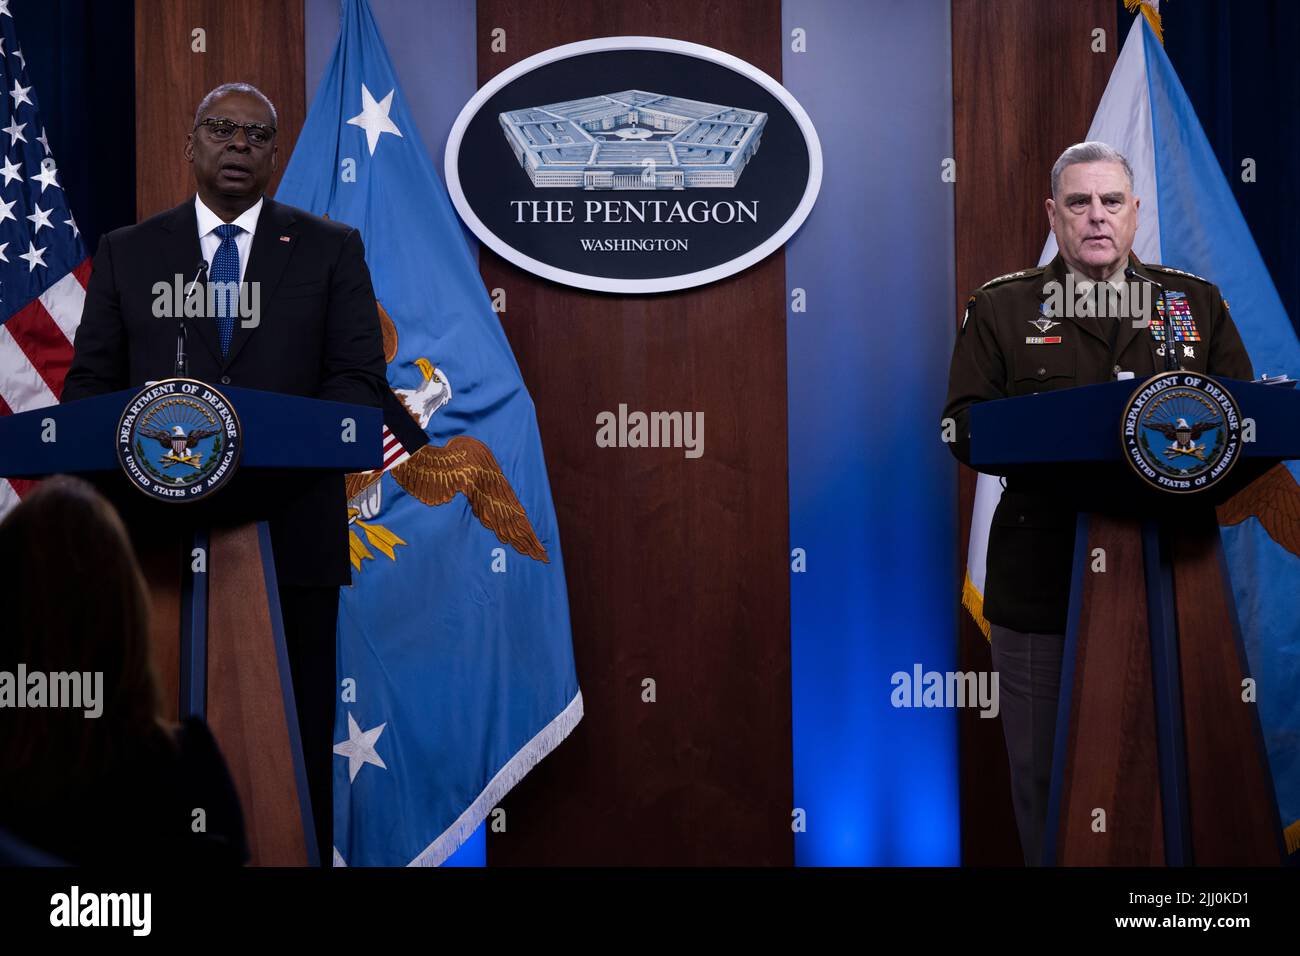 Arlington, United States Of America. 10th June, 2021. Arlington, United States of America. 10 June, 2021. U.S. Secretary of Defense Lloyd Austin, left, alongside Chairman of the Joint Chiefs of Staff, Gen. Mark A. Milley, right, respond to questions during a press conference at the Pentagon, July 20, 2022 in Arlington, Virginia. Credit: Chad J. McNeeley/DOD/Alamy Live News Stock Photo